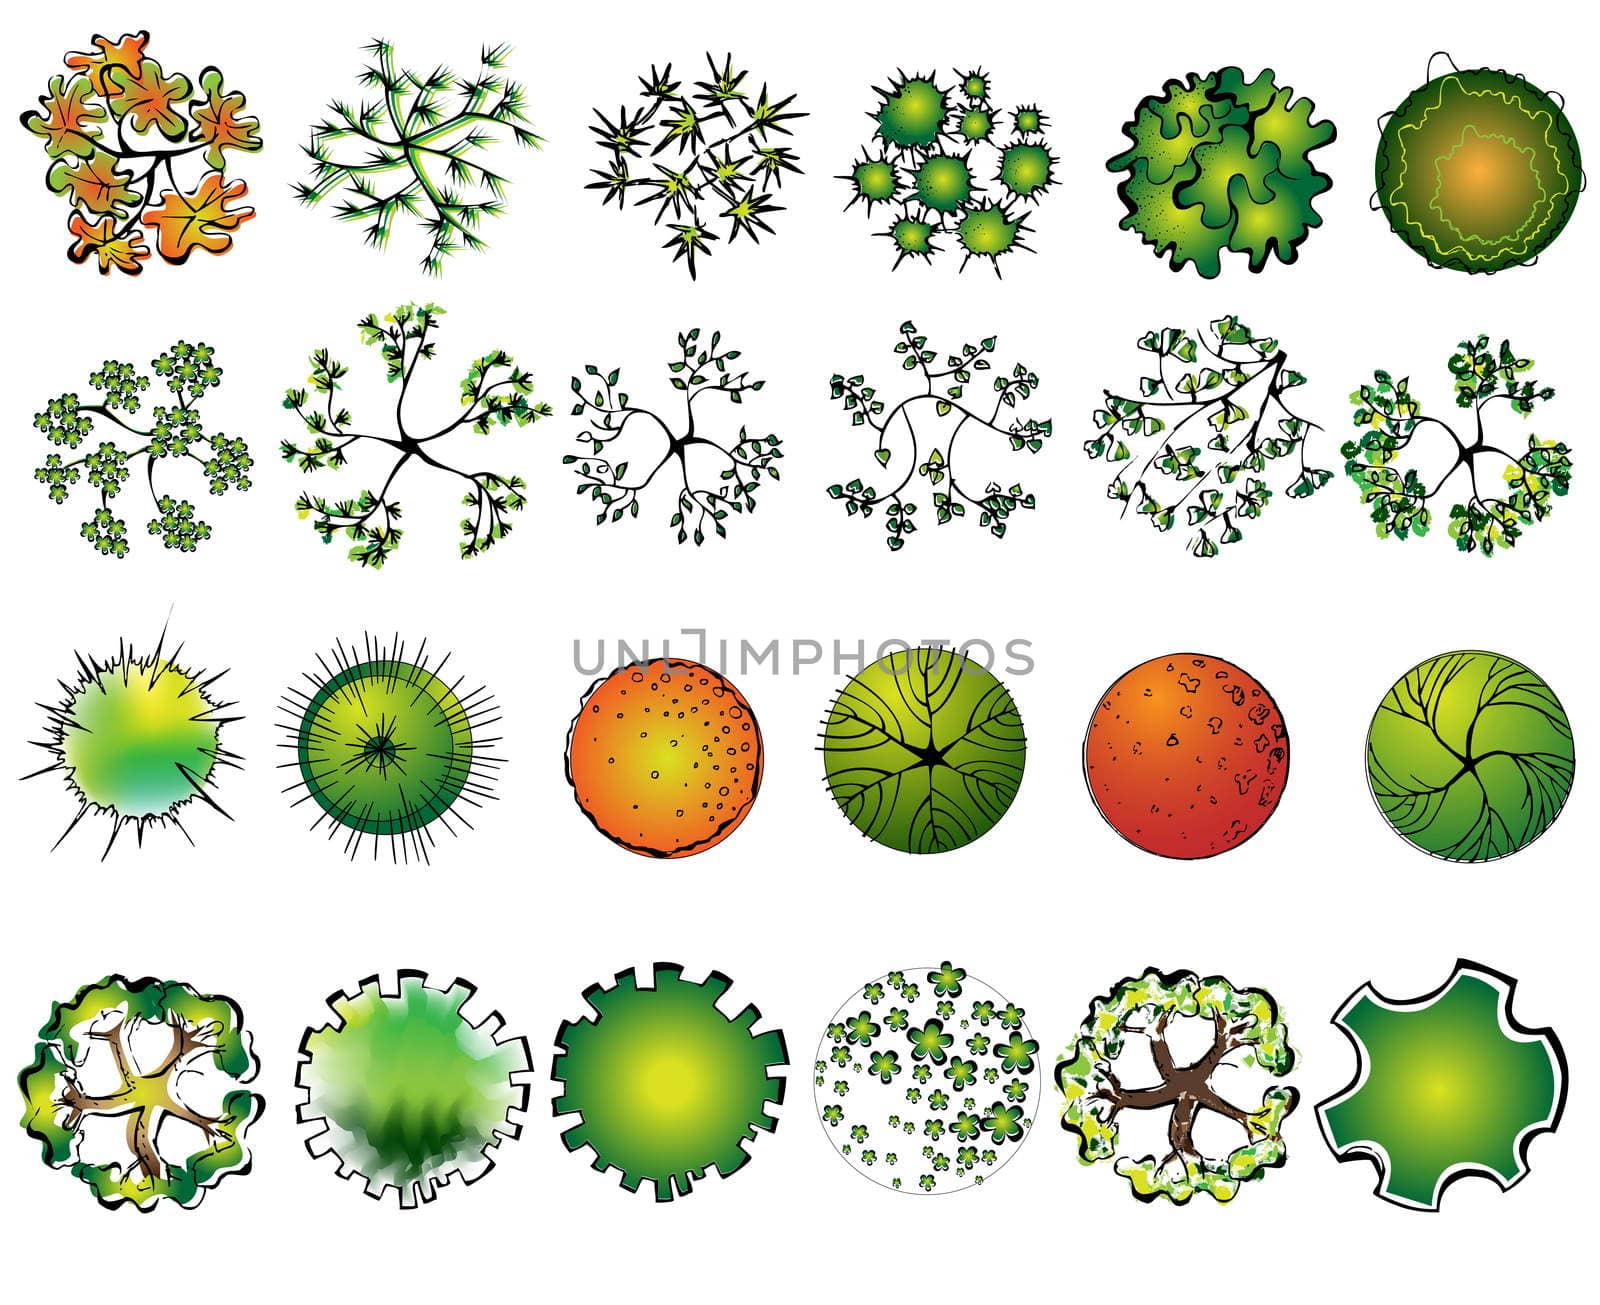 A set of colored treetop symbols, for architectural or landscape design  by jelen80